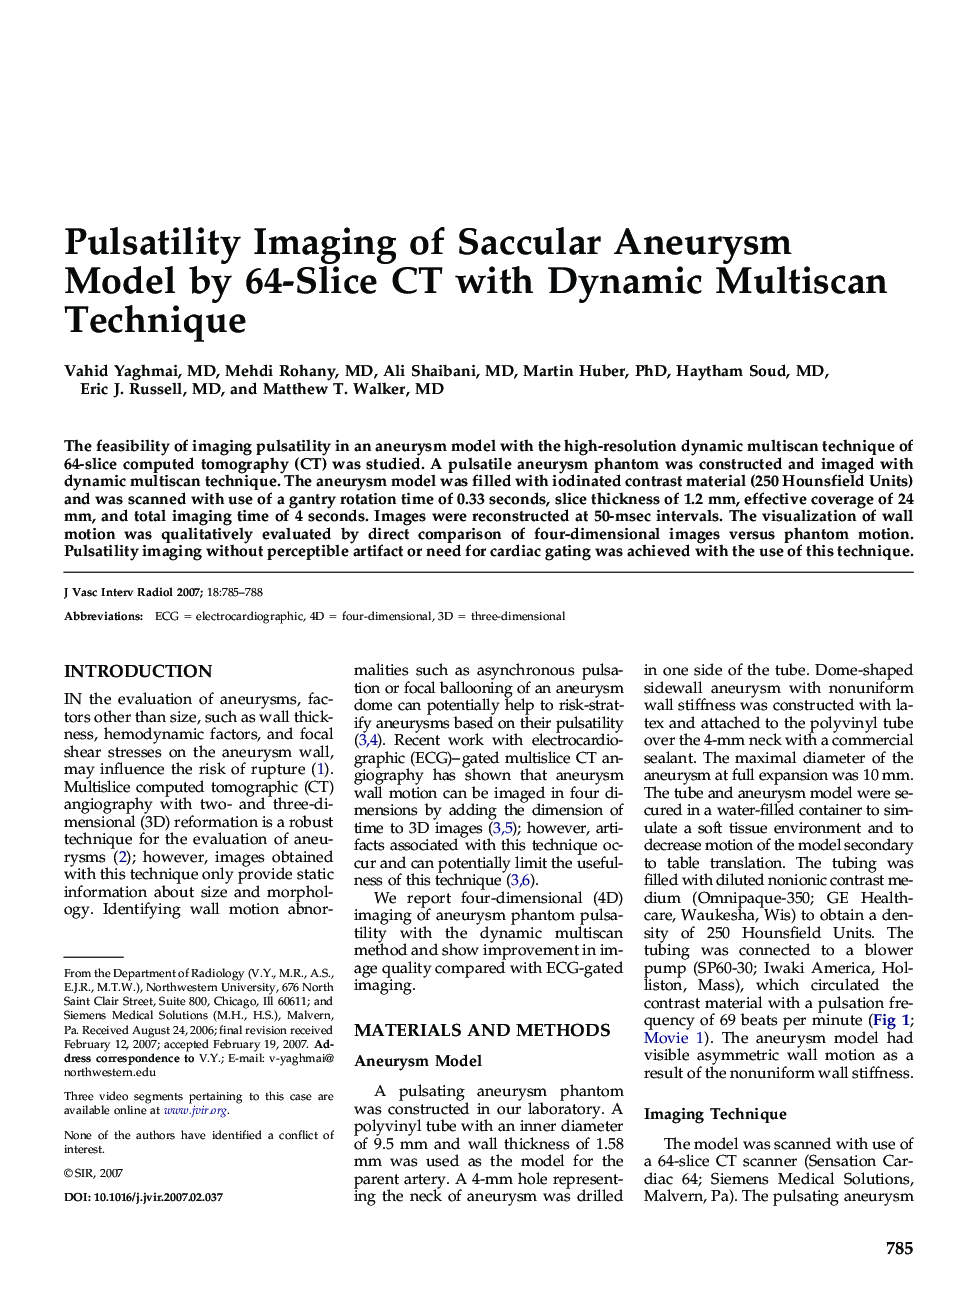 Pulsatility Imaging of Saccular Aneurysm Model by 64-Slice CT with Dynamic Multiscan Technique